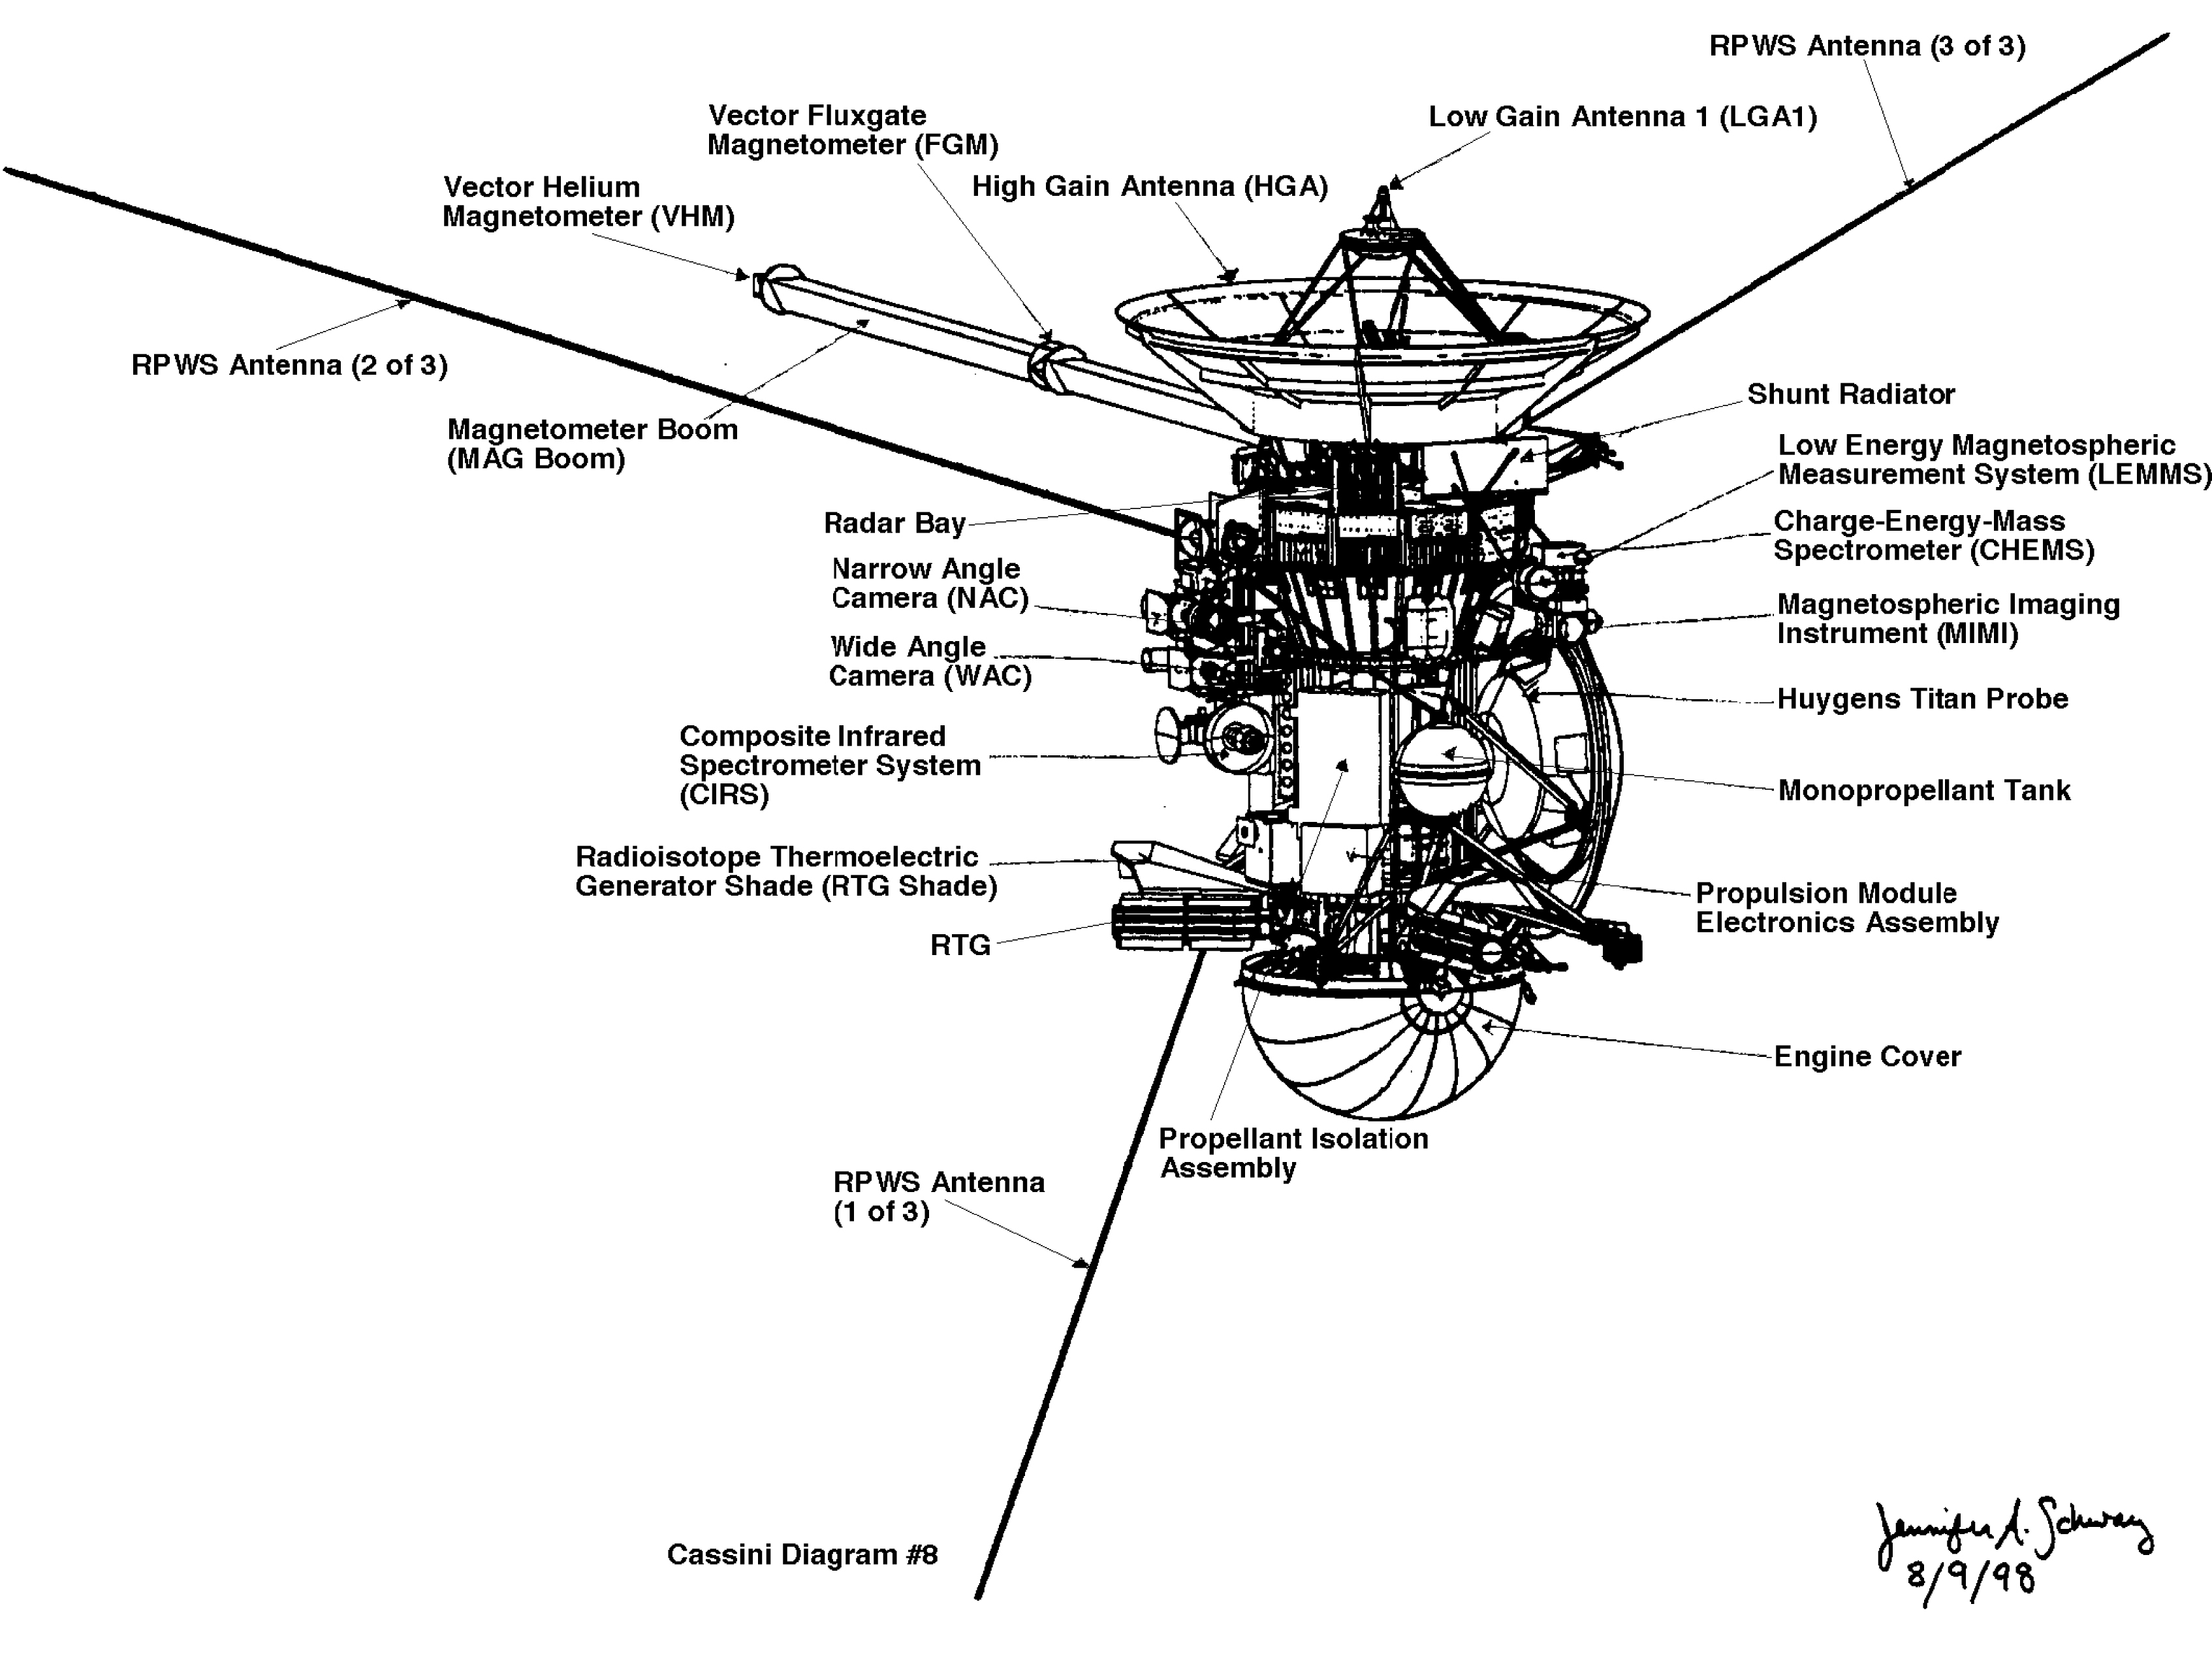 Diagram of the Cassini spacecraft and Huygens probe.